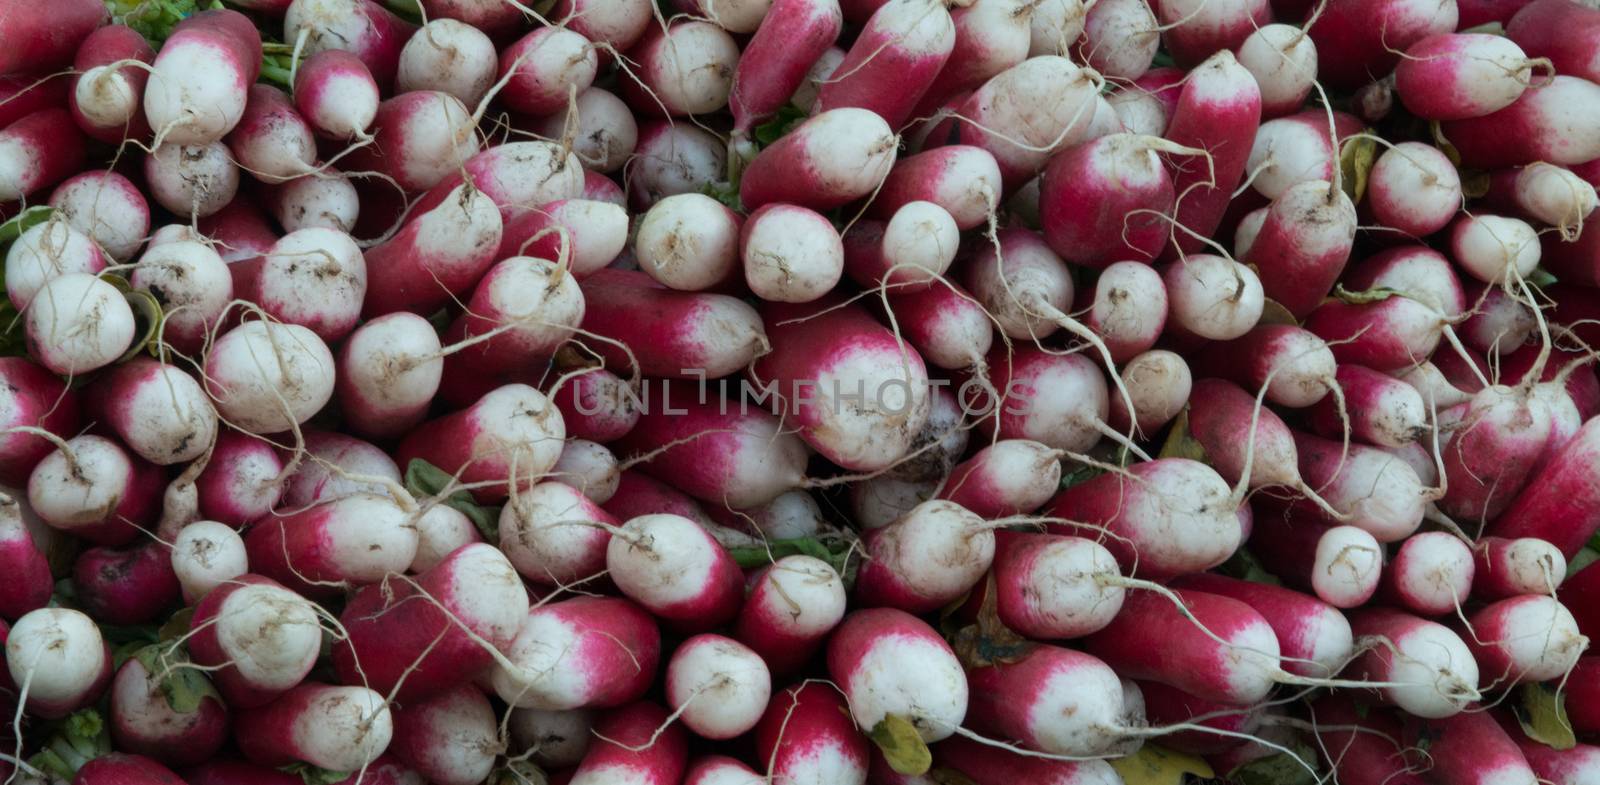 Radishes on Market stall by TimAwe